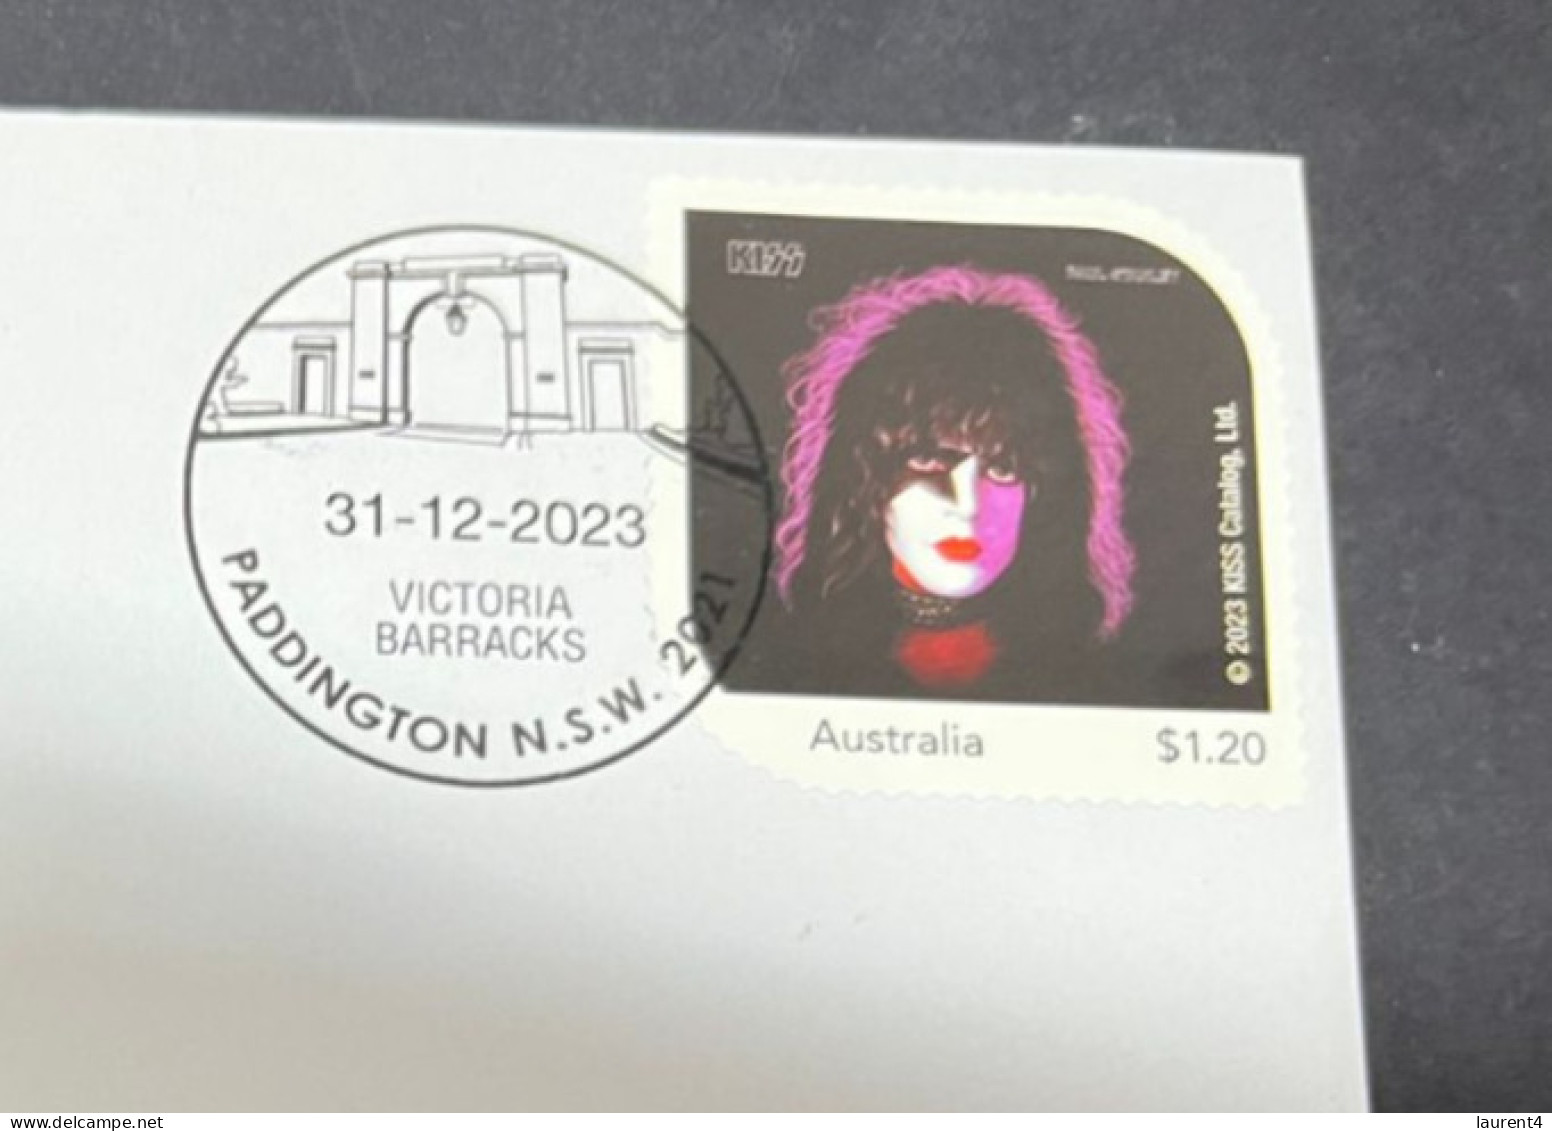 26-3-20234 (4 Y 8) Kiss (music Band) With KISS OZ Stamp (Paul Stanley) - Music